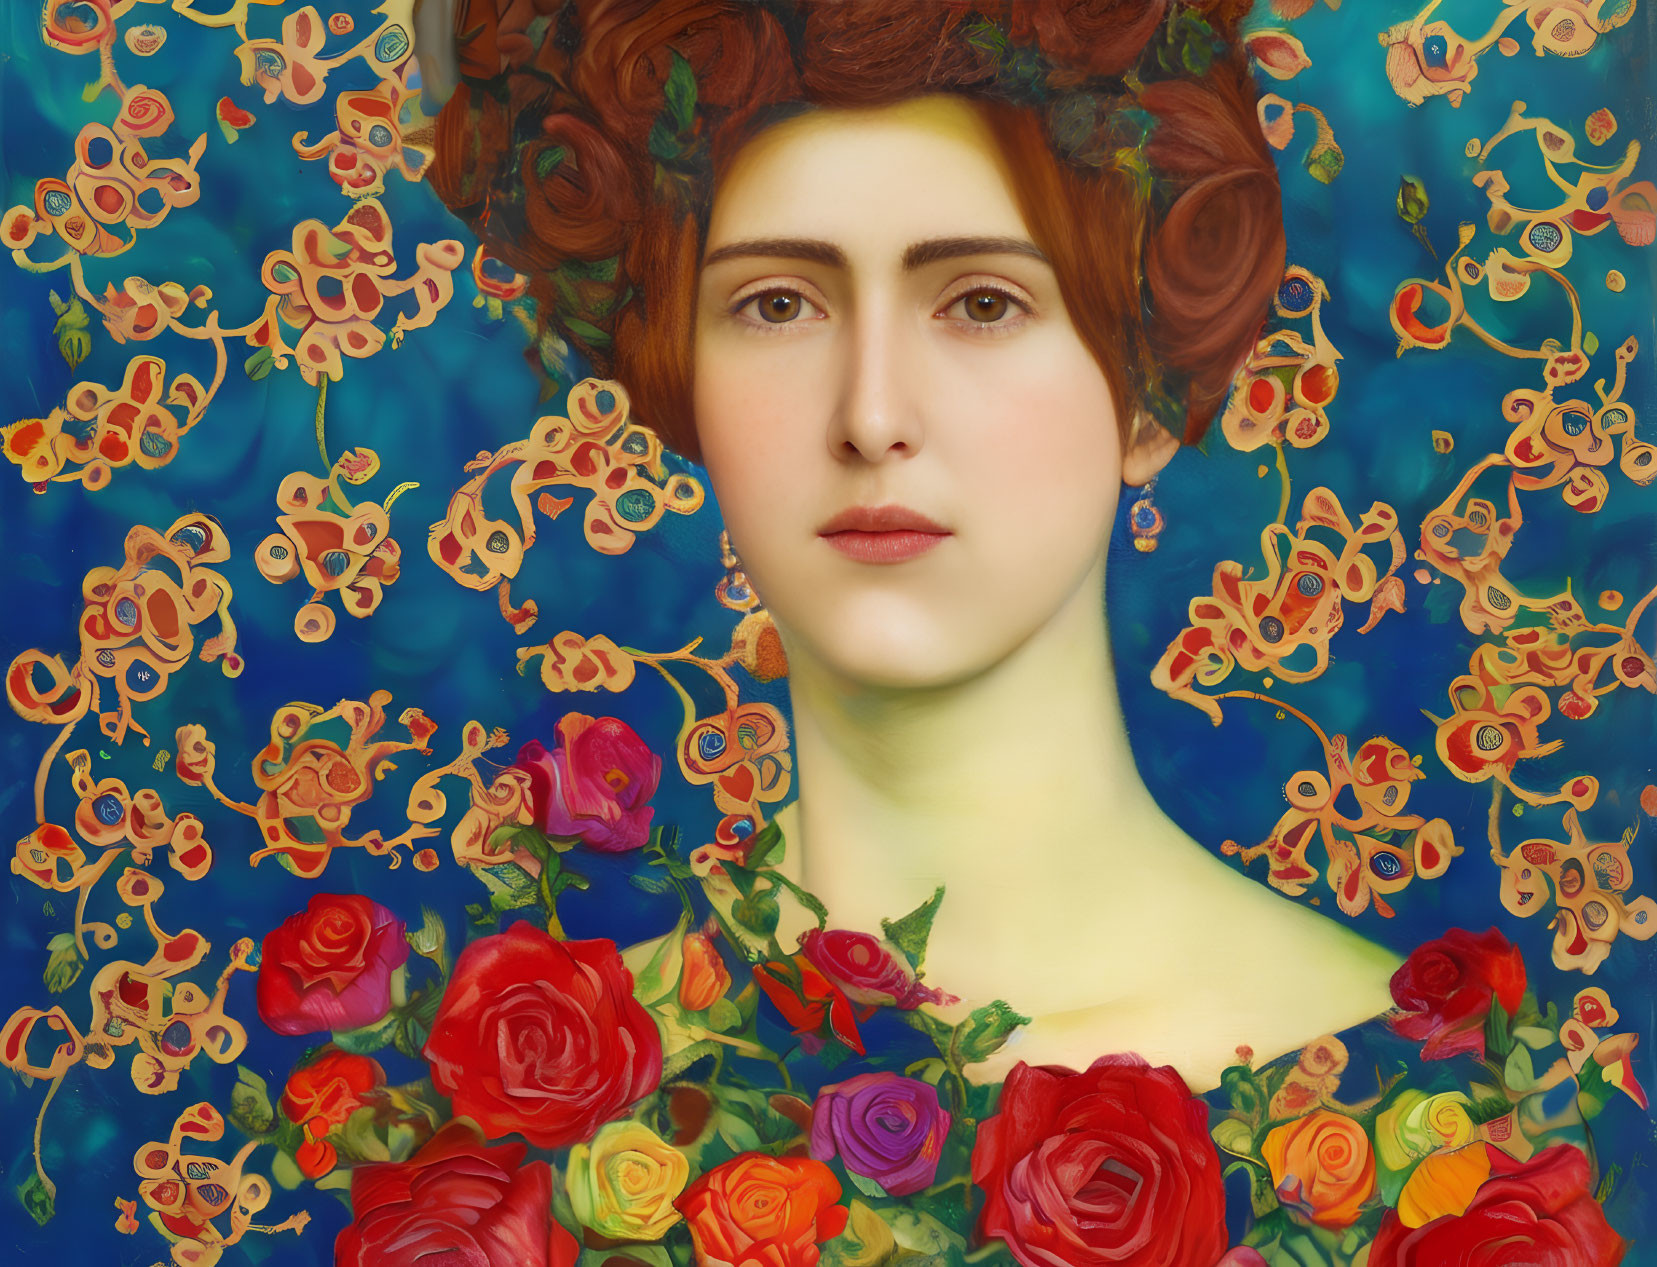 Portrait of woman with auburn hair surrounded by floral patterns